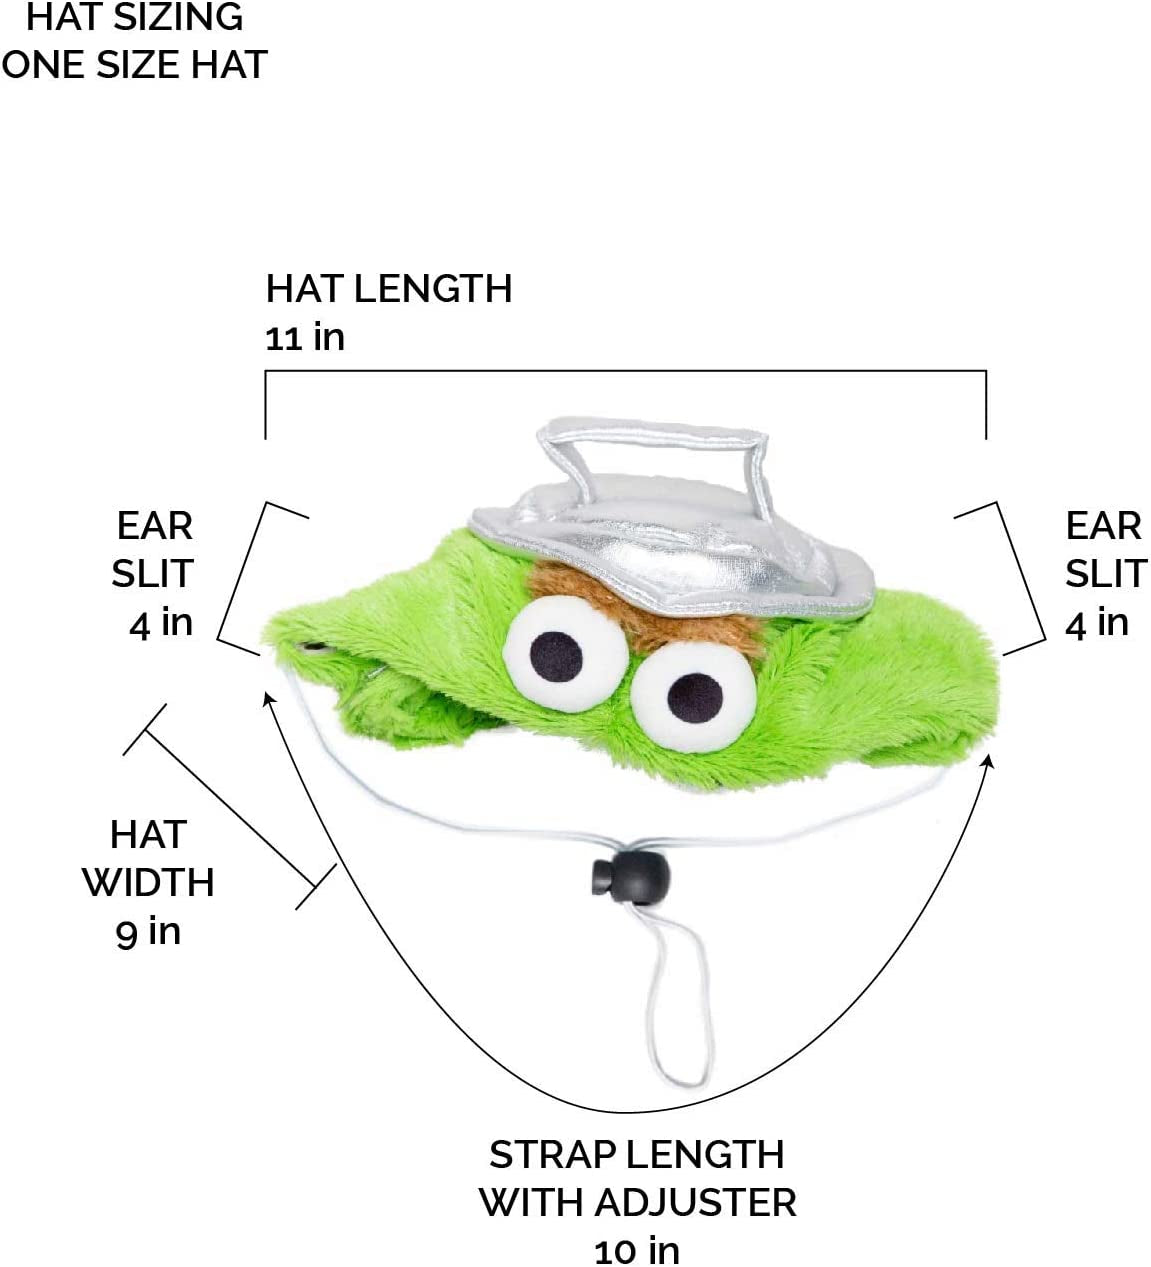 Pet Krewe Large Oscar the Grouch Dog Costume - Fits Small, Medium, Large and Extra Large Pets - Perfect for Halloween, Christmas Holiday, Parties, Photoshoots, Gifts for Dog Lovers